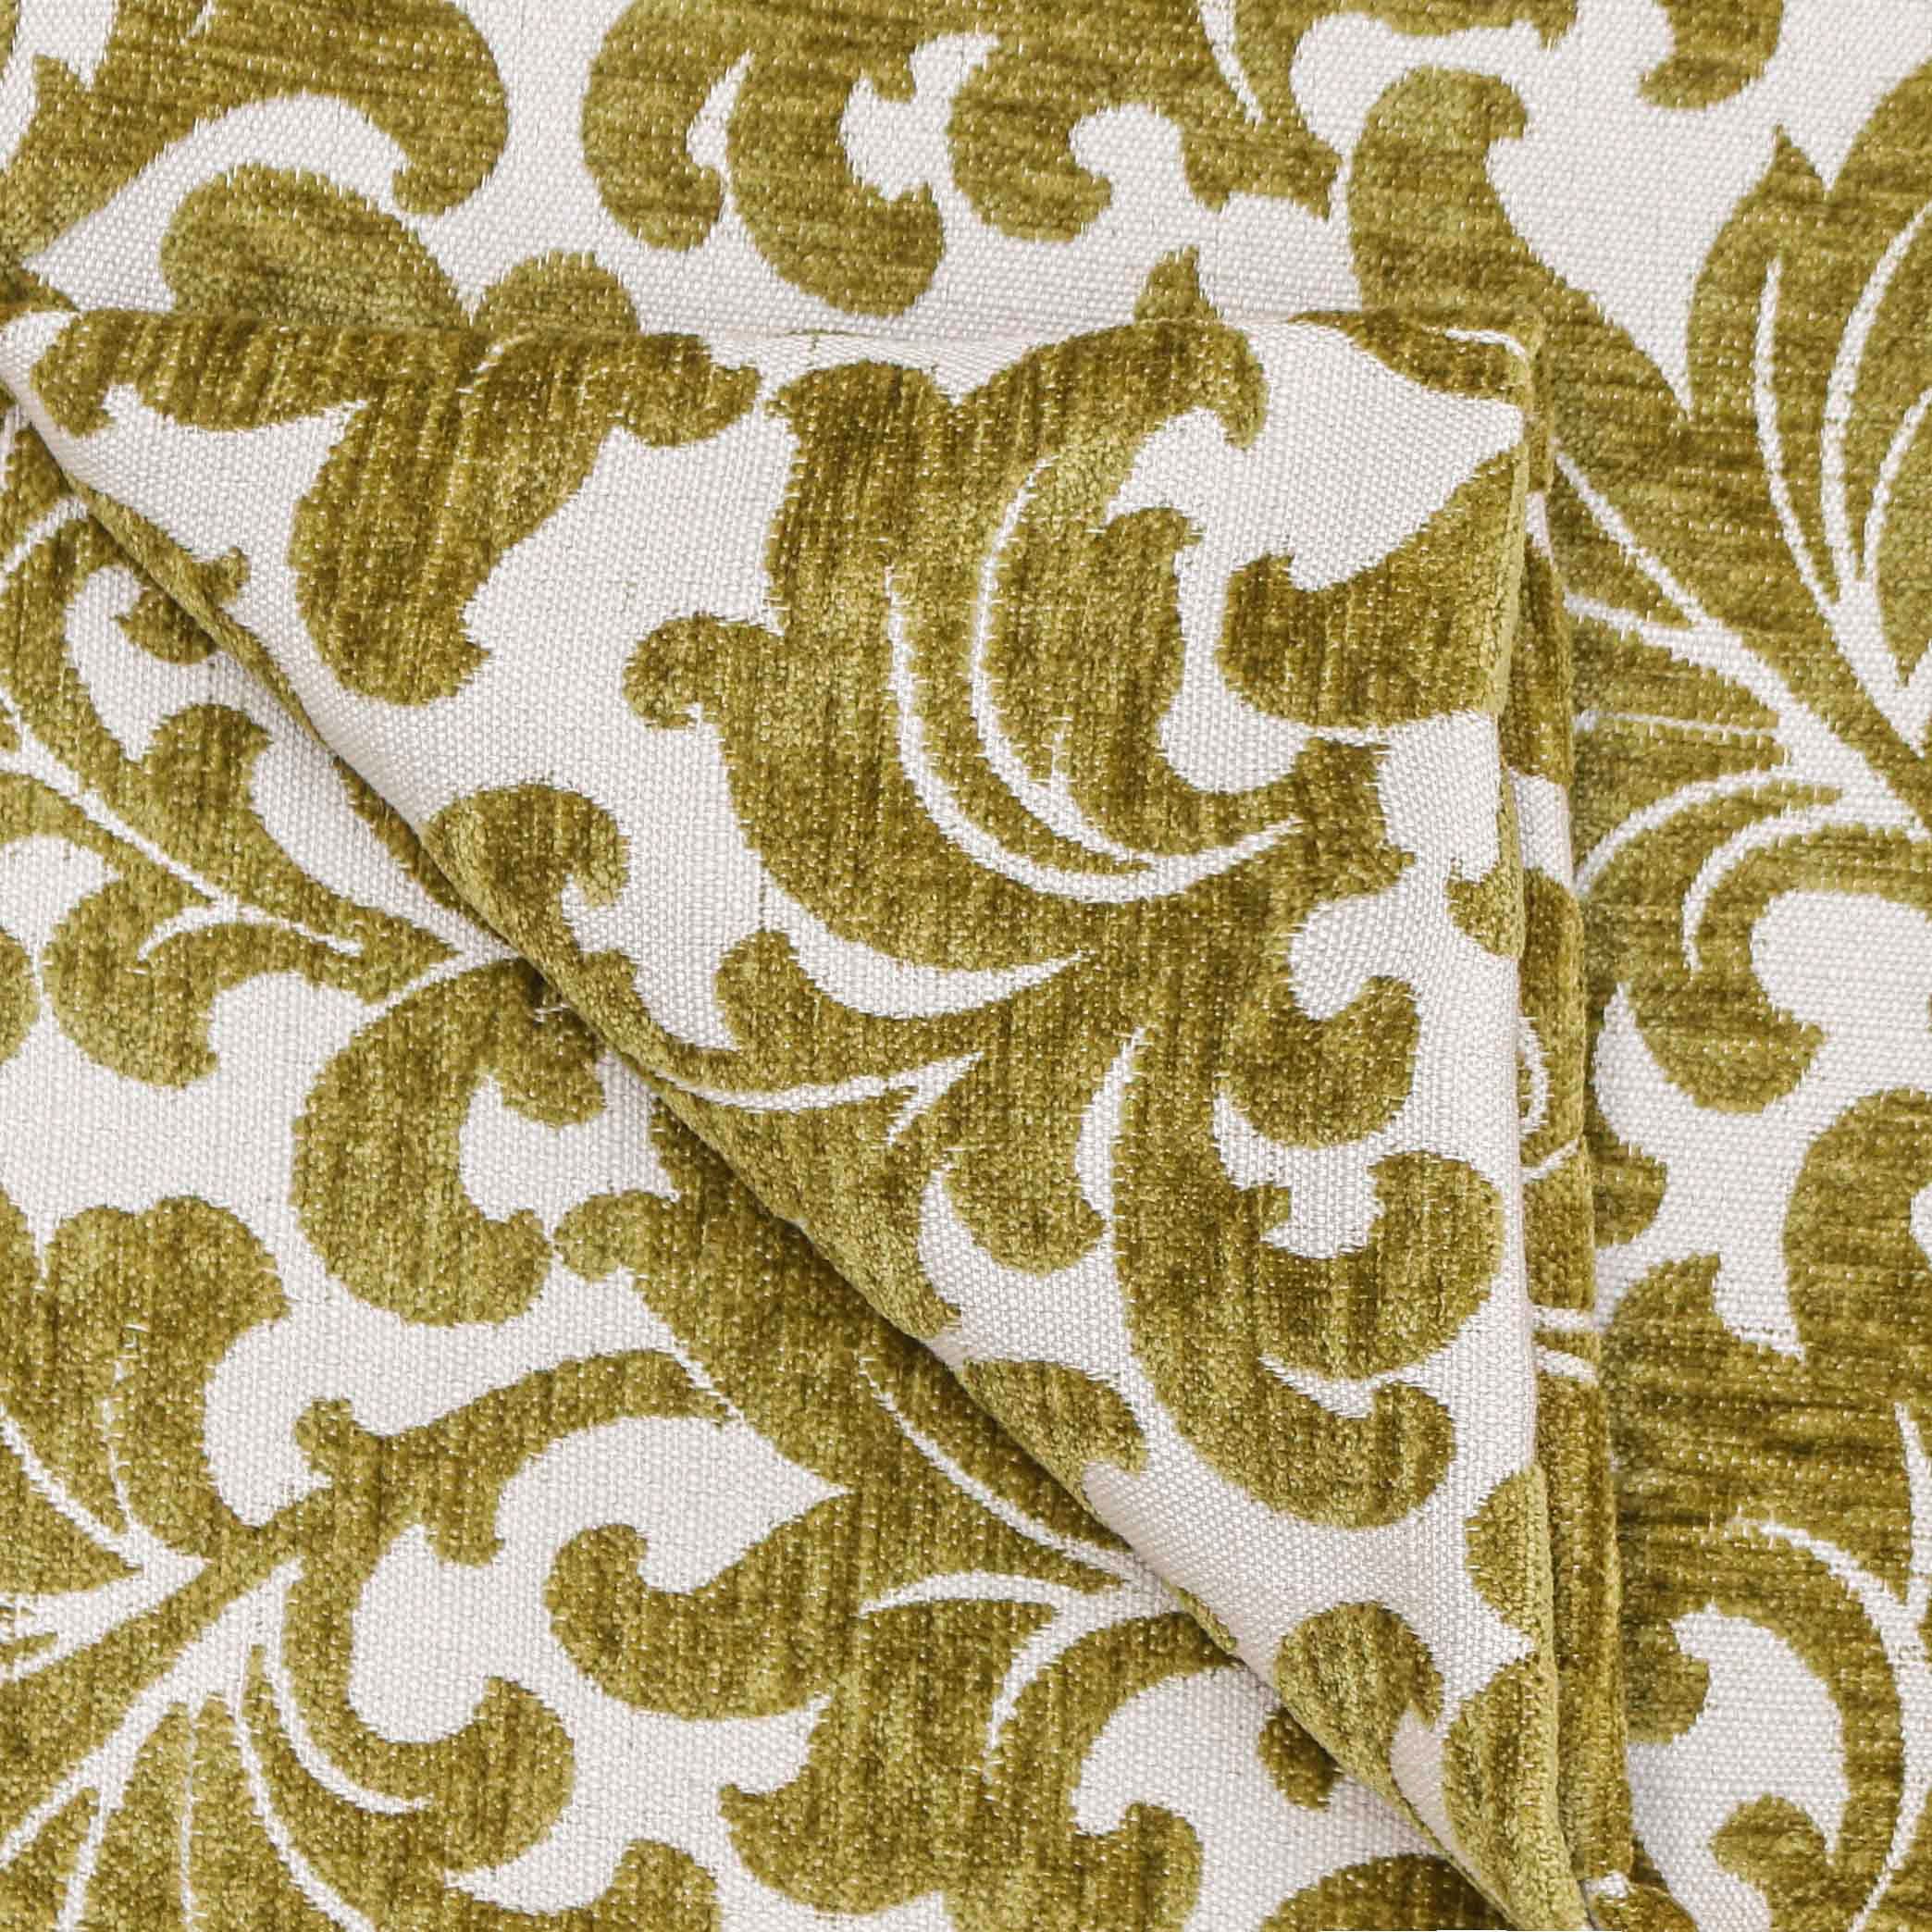 Chartreuse Flowers Fabric By The Yard Jacquard Velvet Fabric | Etsy